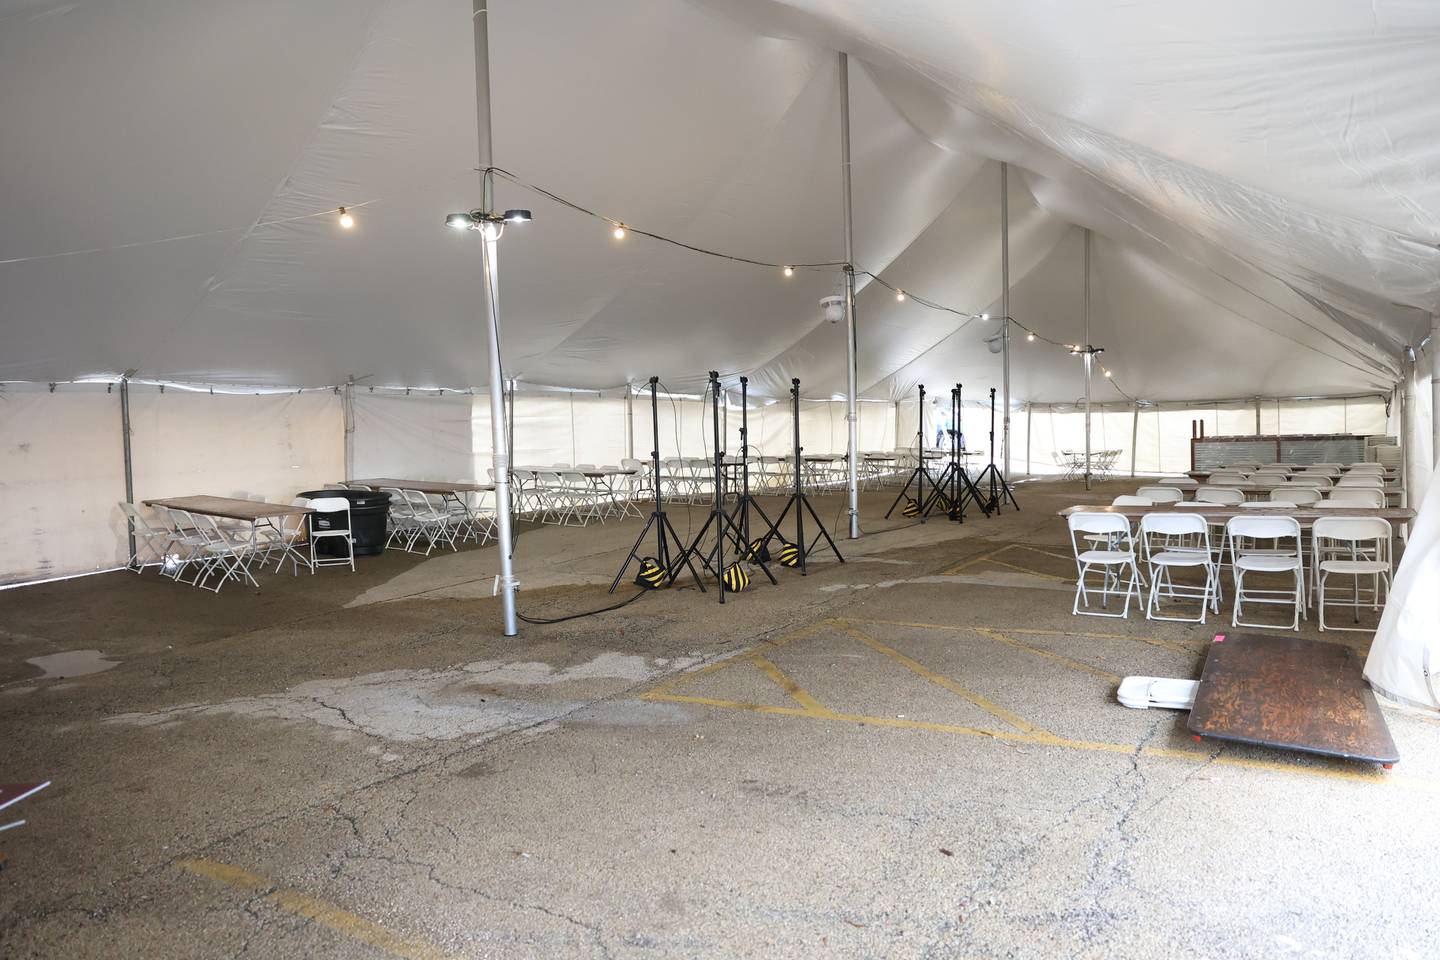 To handle the large turnout expected for the upcoming Kentucky Derby the new Club Hawthorne at Black eyed Susan in Joliet is setting up a tent with extra seating and televisions for the off-tracking betting venue. Friday, May 6, 2022, in Joliet.